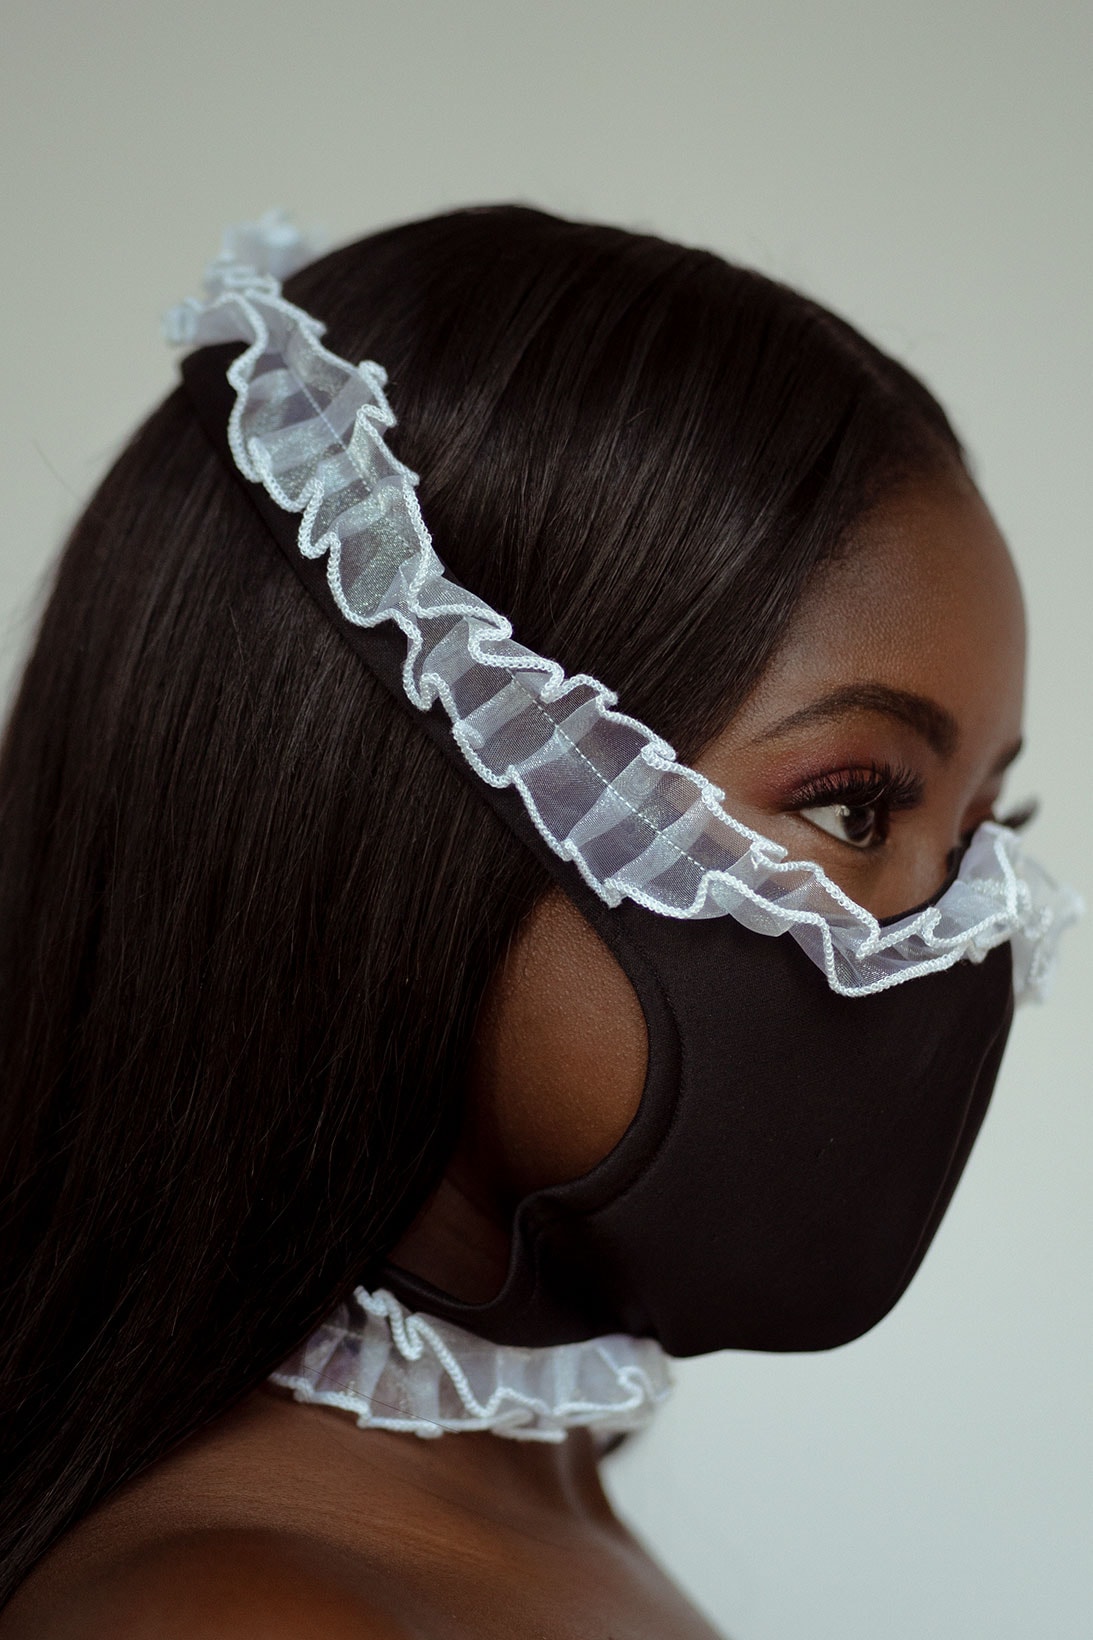 tia adeola ruffle face mask black white colorway limited edition